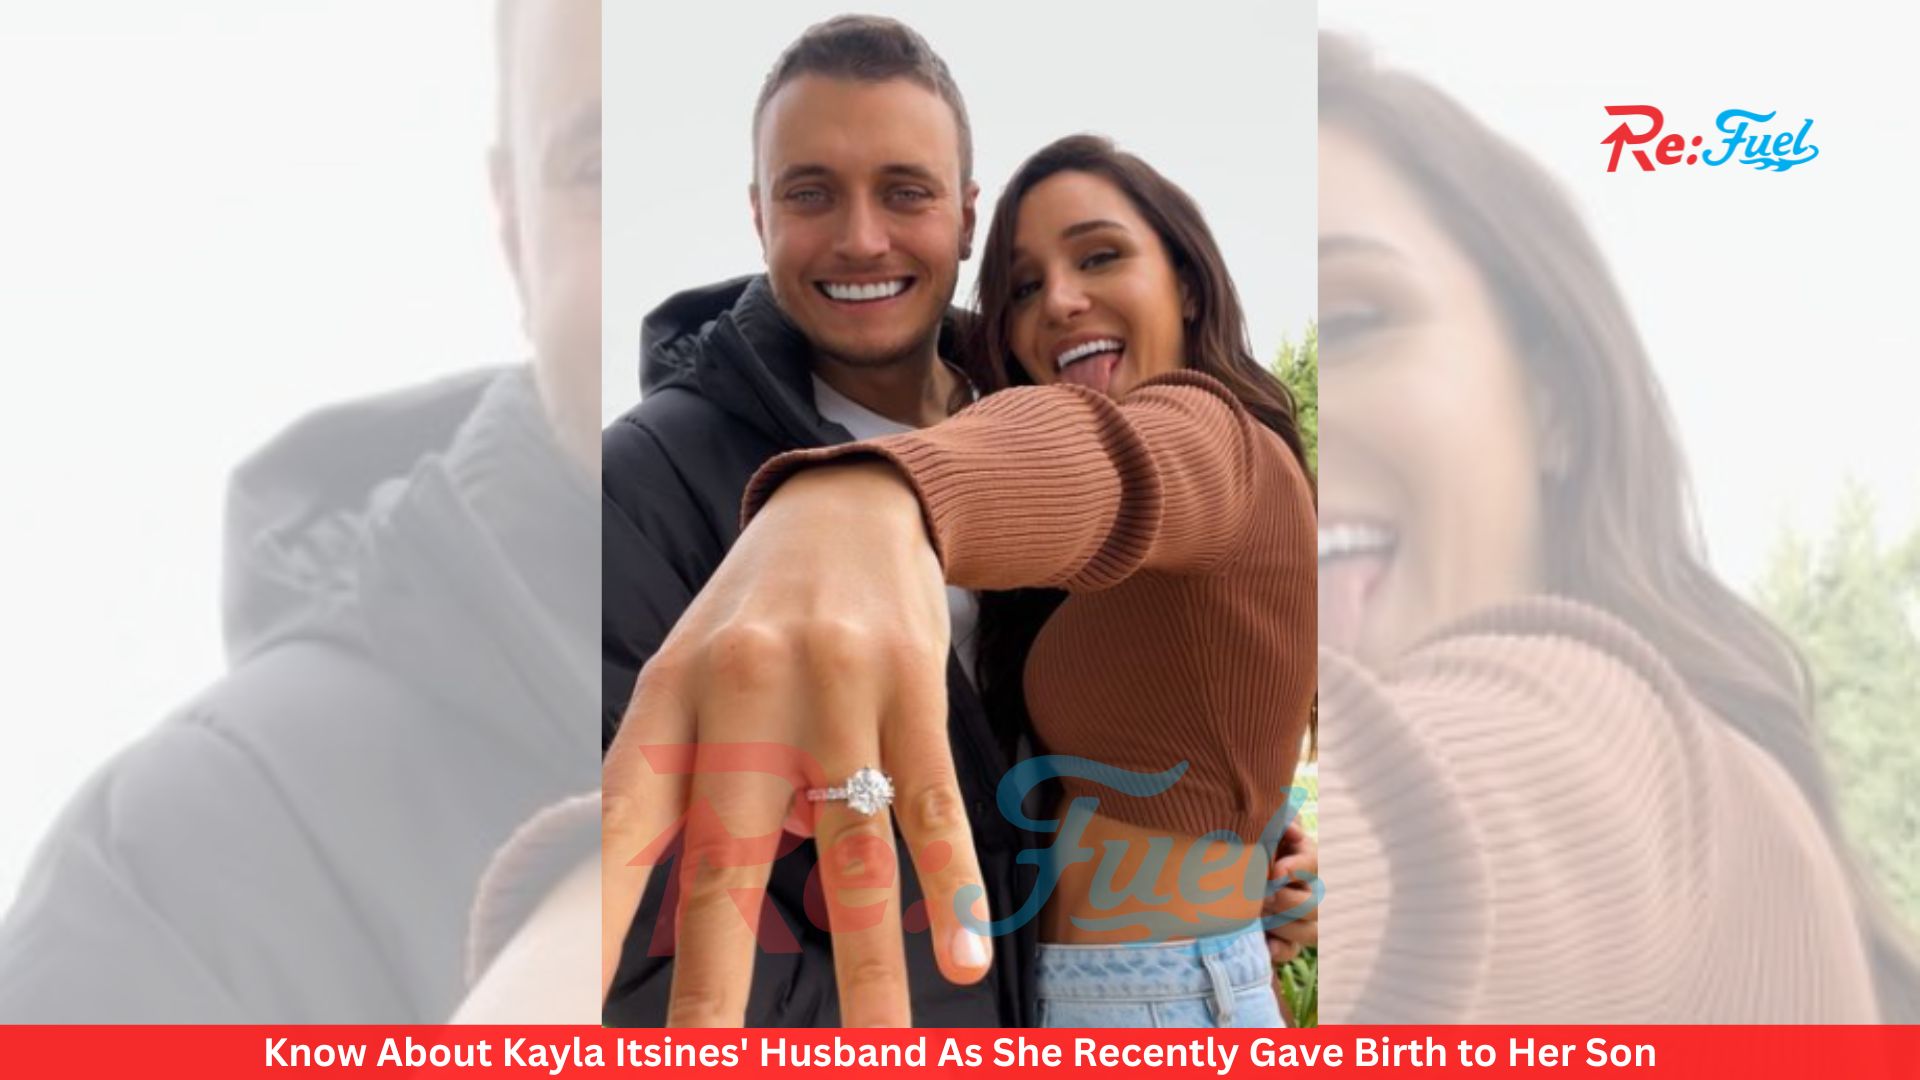 Know About Kayla Itsines' Husband As She Recently Gave Birth to Her Son